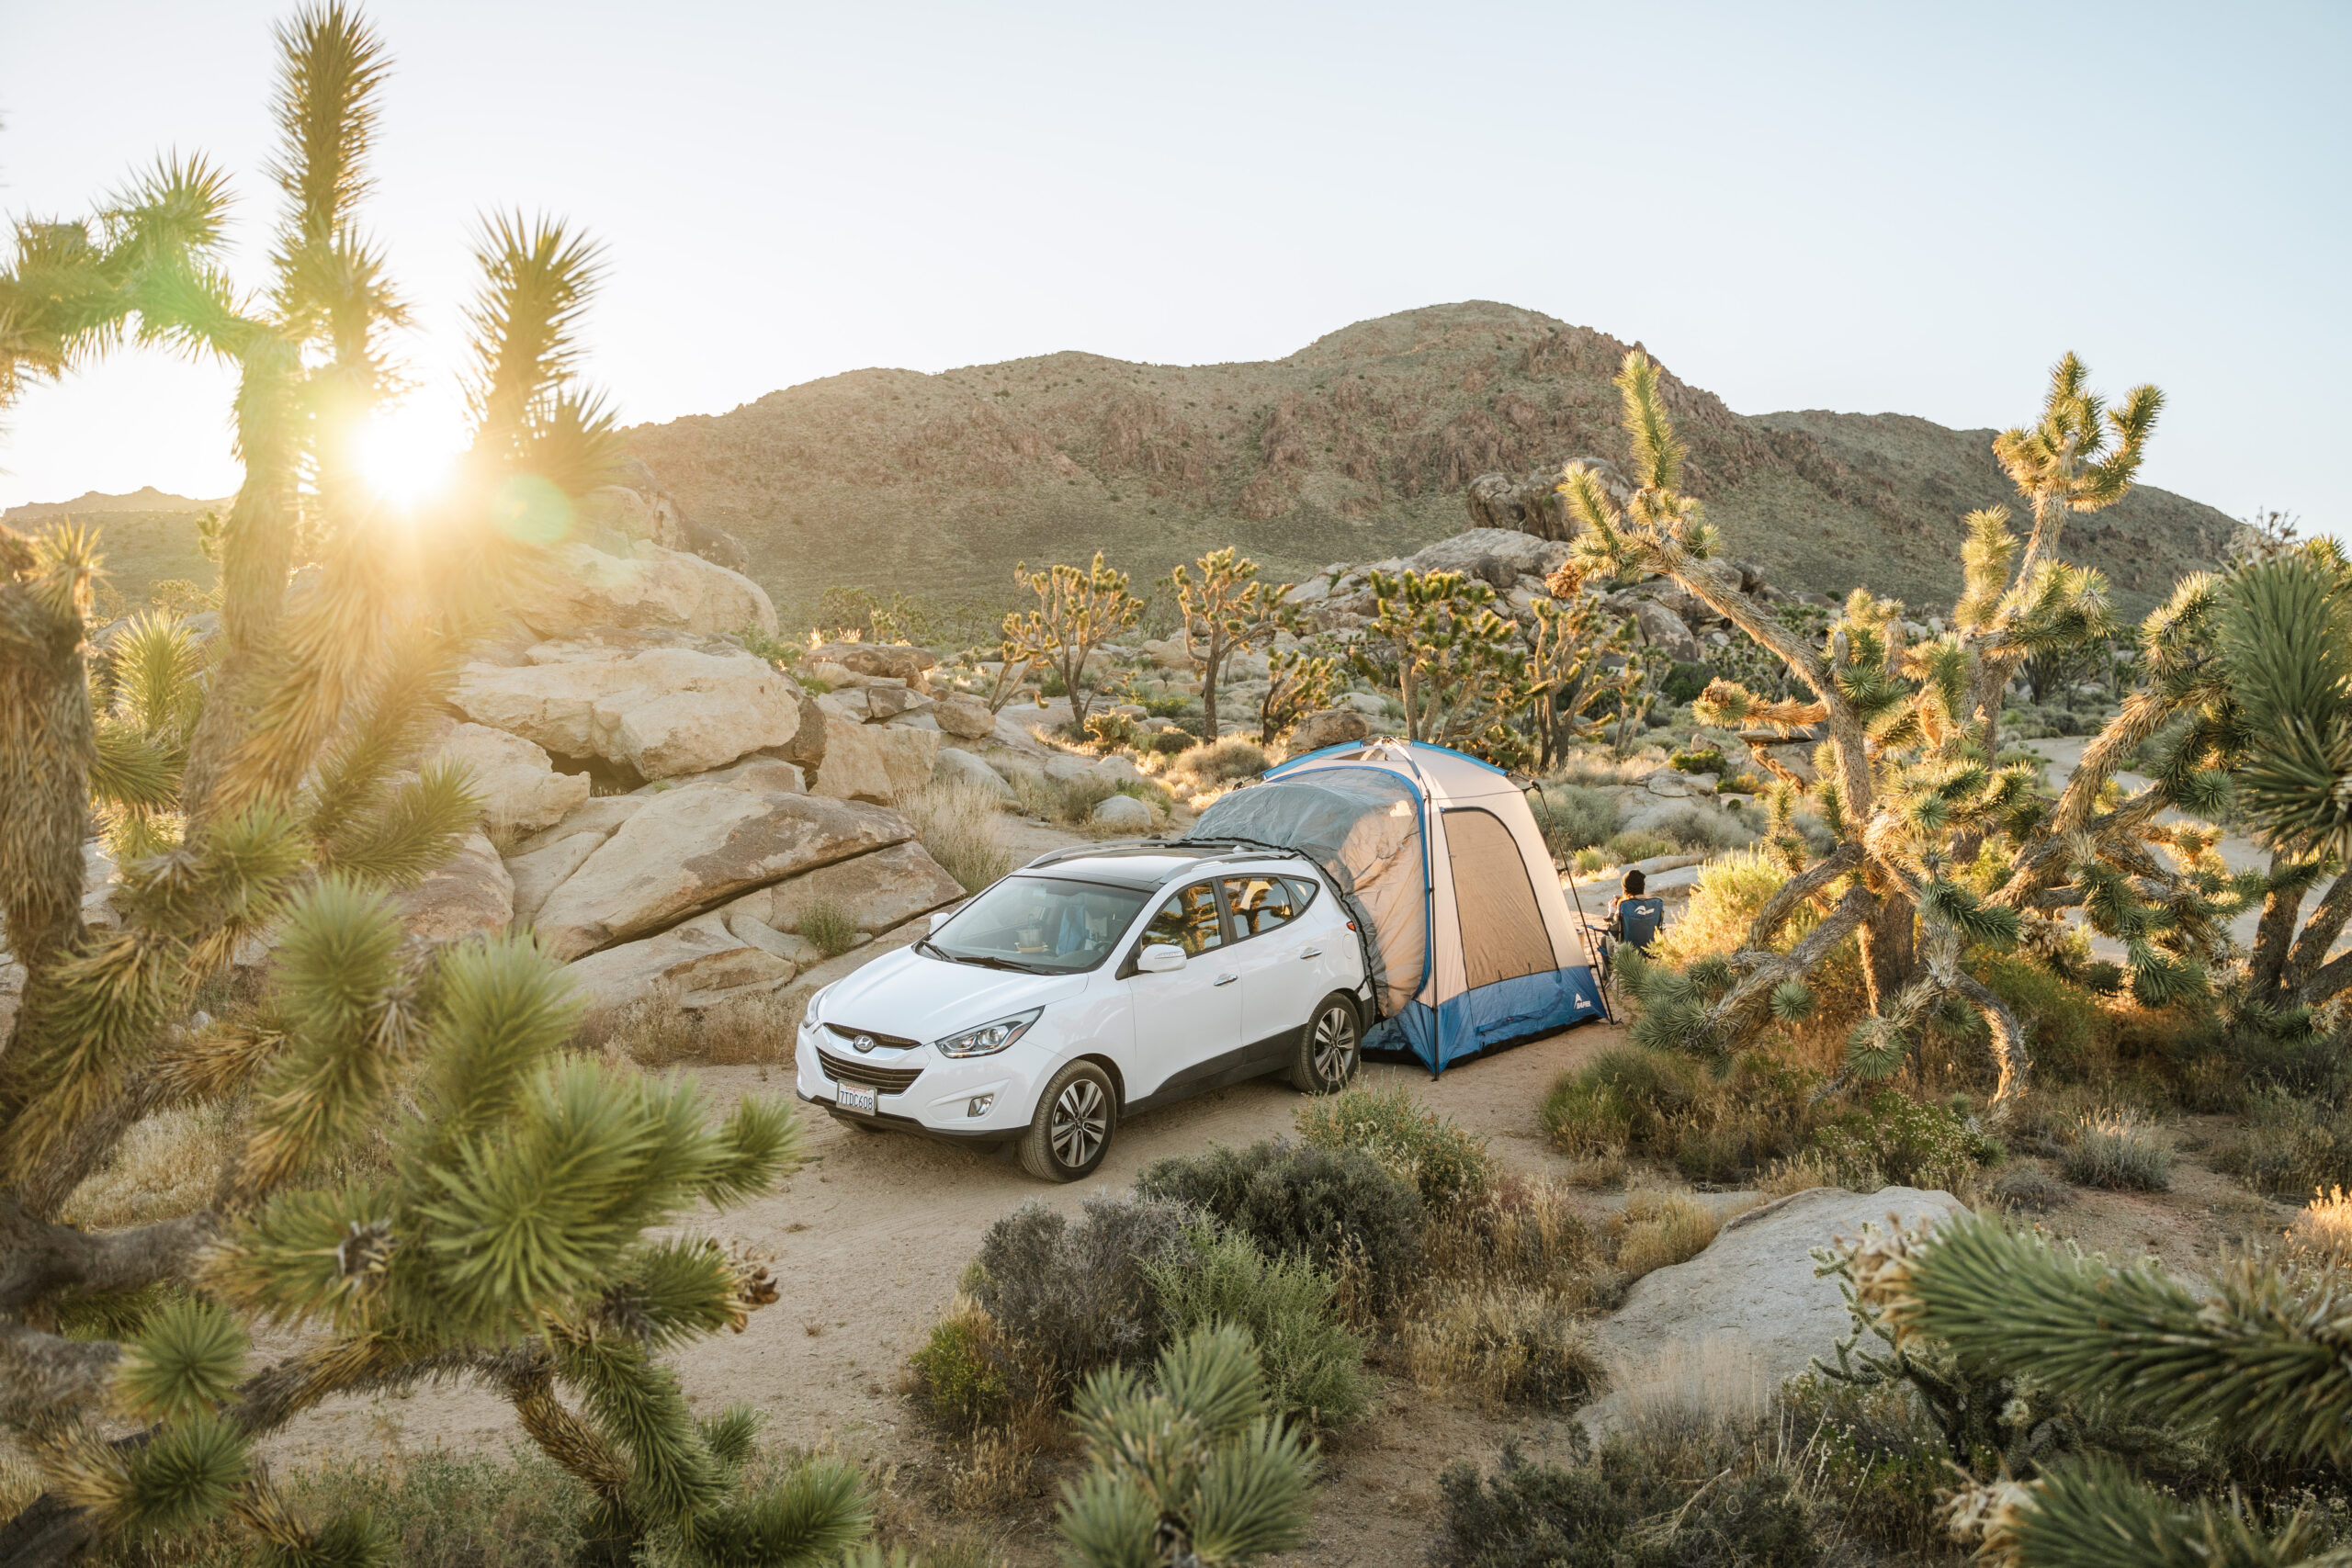 Car Camping: The Perfect Solo Setup for Under $500 - Kamp-Rite